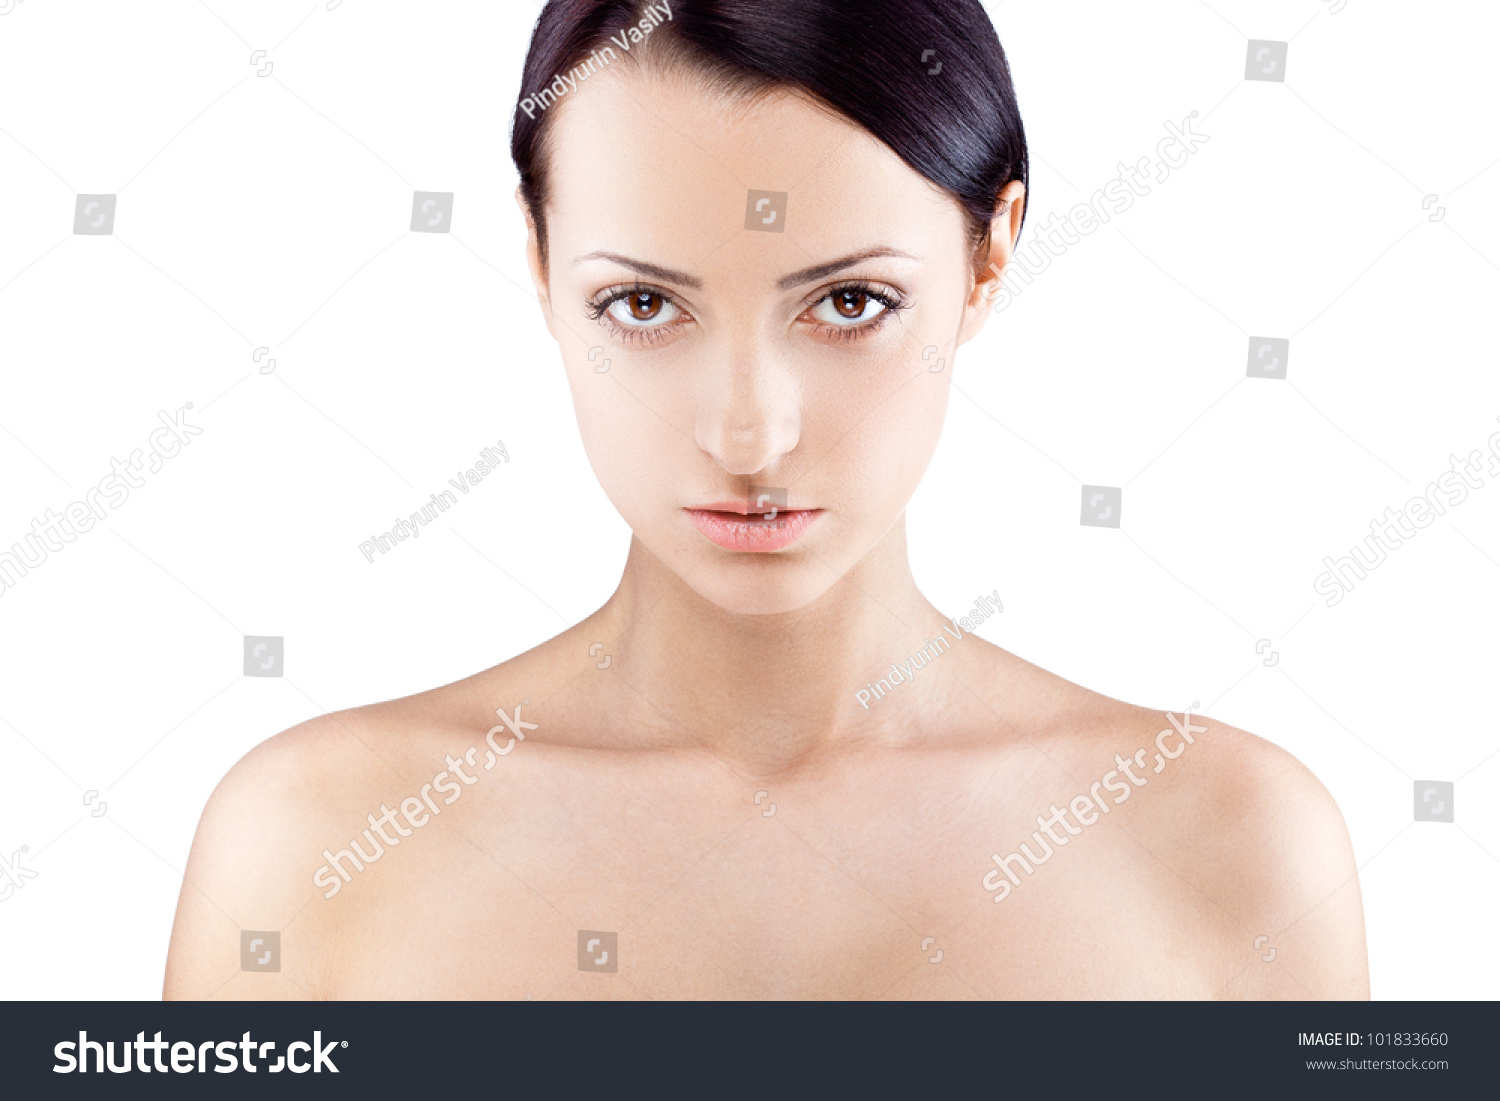 The Beautiful Girl Naked Shoulders Portrait On A Gray 